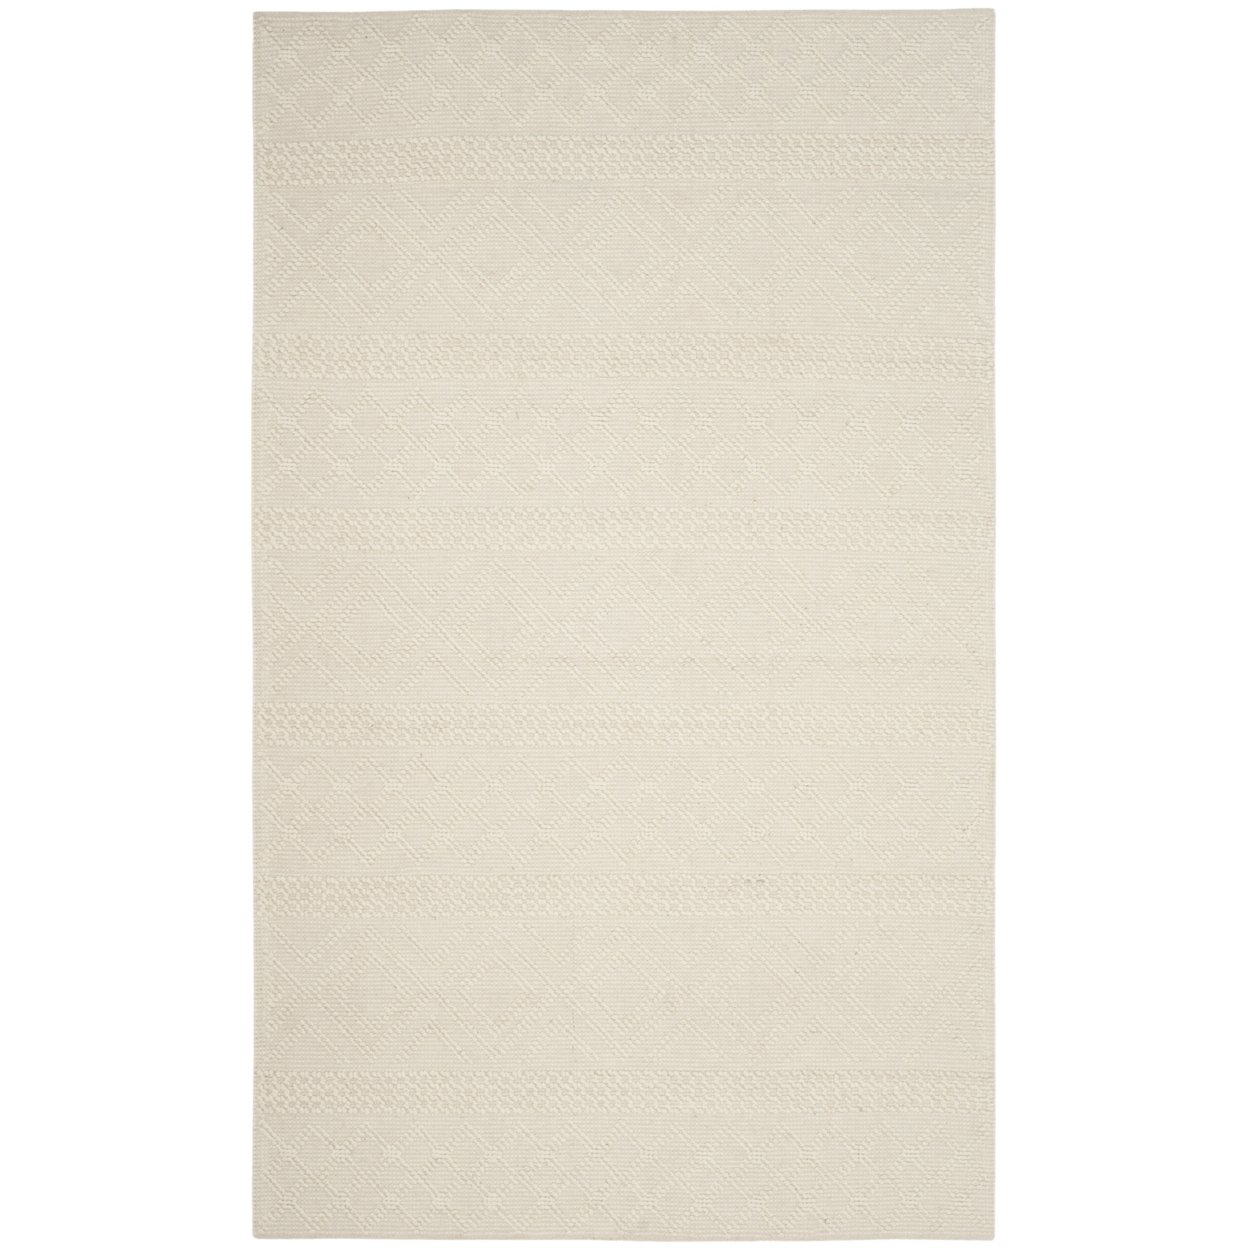 SAFAVIEH Vermont Collection VRM211A Handwoven Ivory Rug - 5 X 8